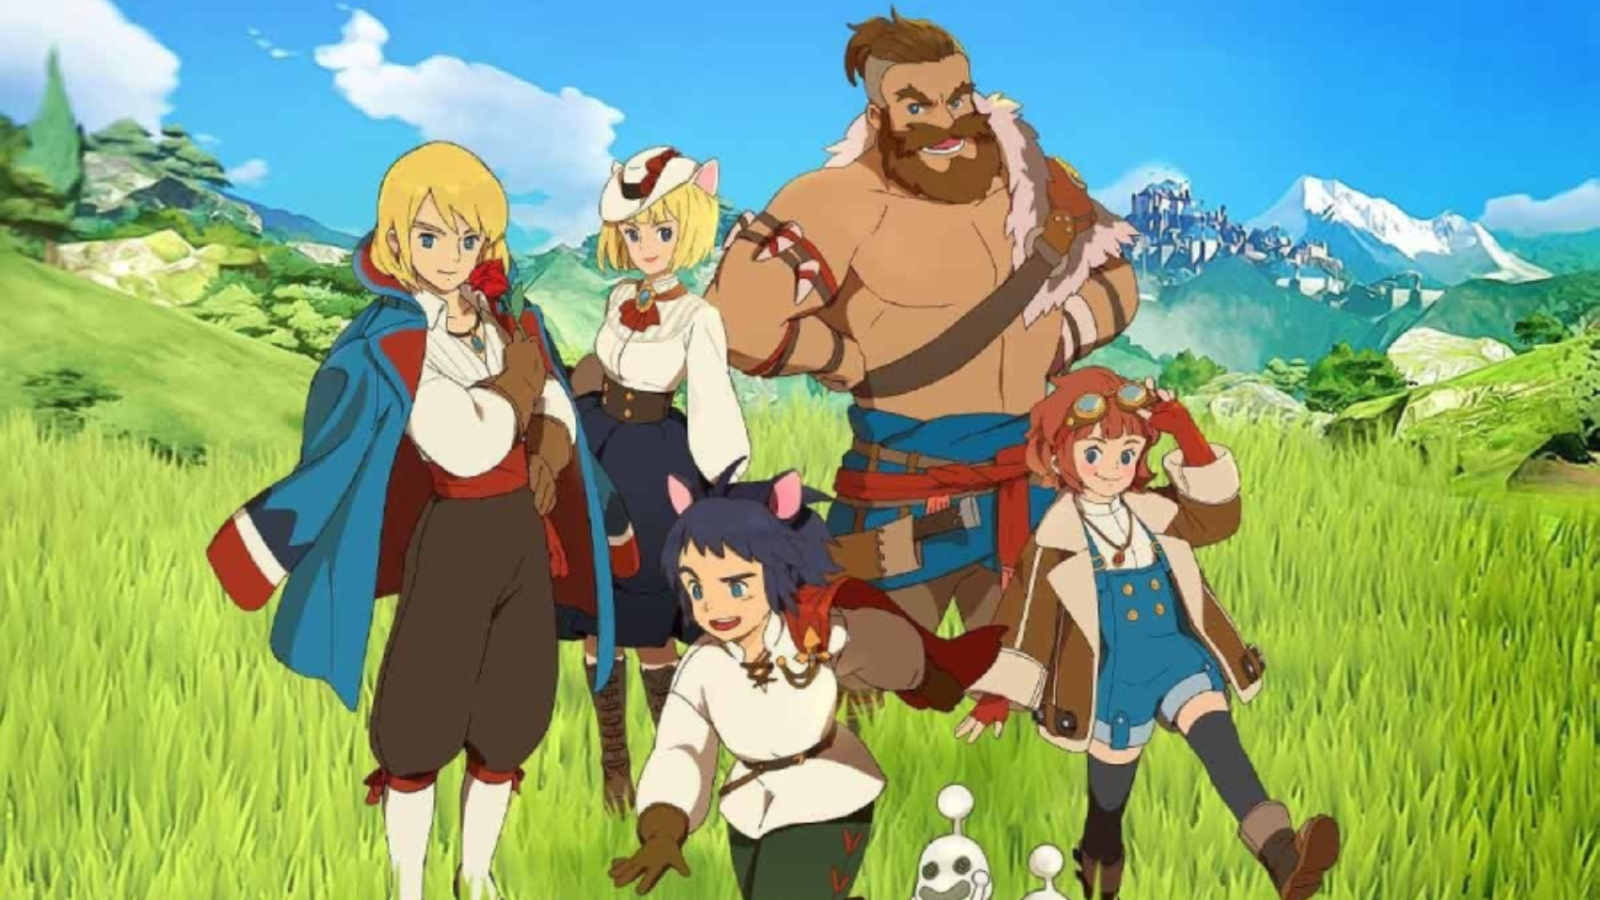 Ni No Kuni Mobile Mmo Out Globally This Month | Eurogamer.Net